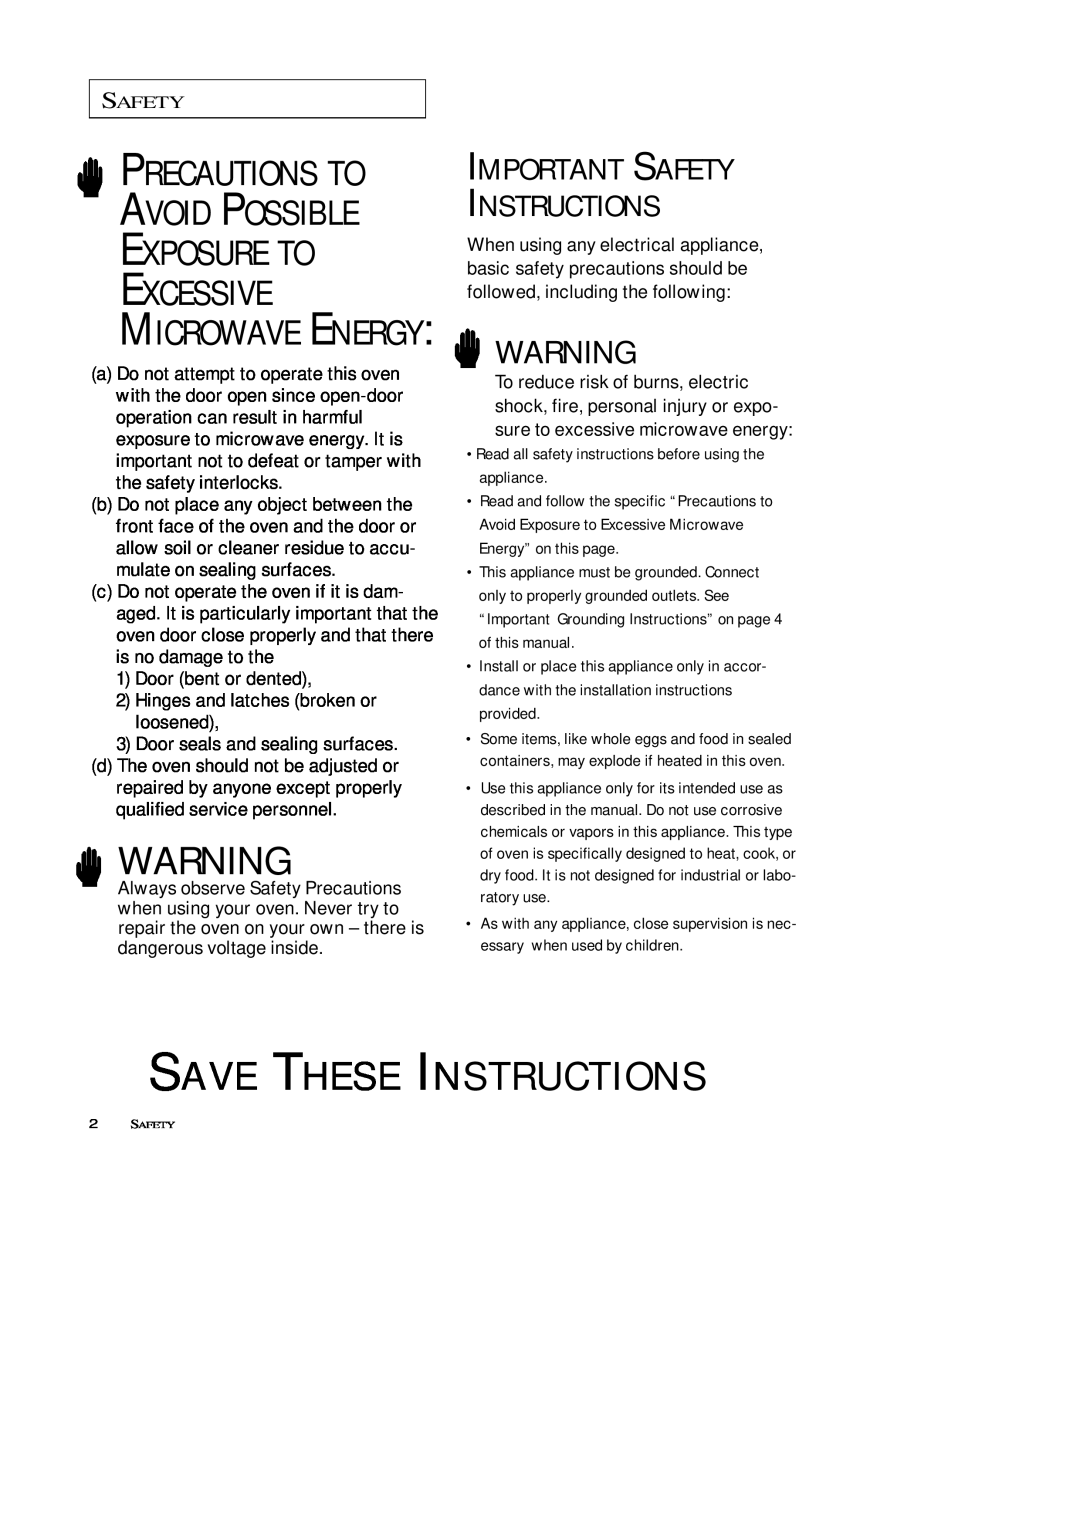 Samsung MW7593G, MW5592W Save These Instructions, Precautions To Avoid Possible Exposure To Excessive, Microwave Energy 